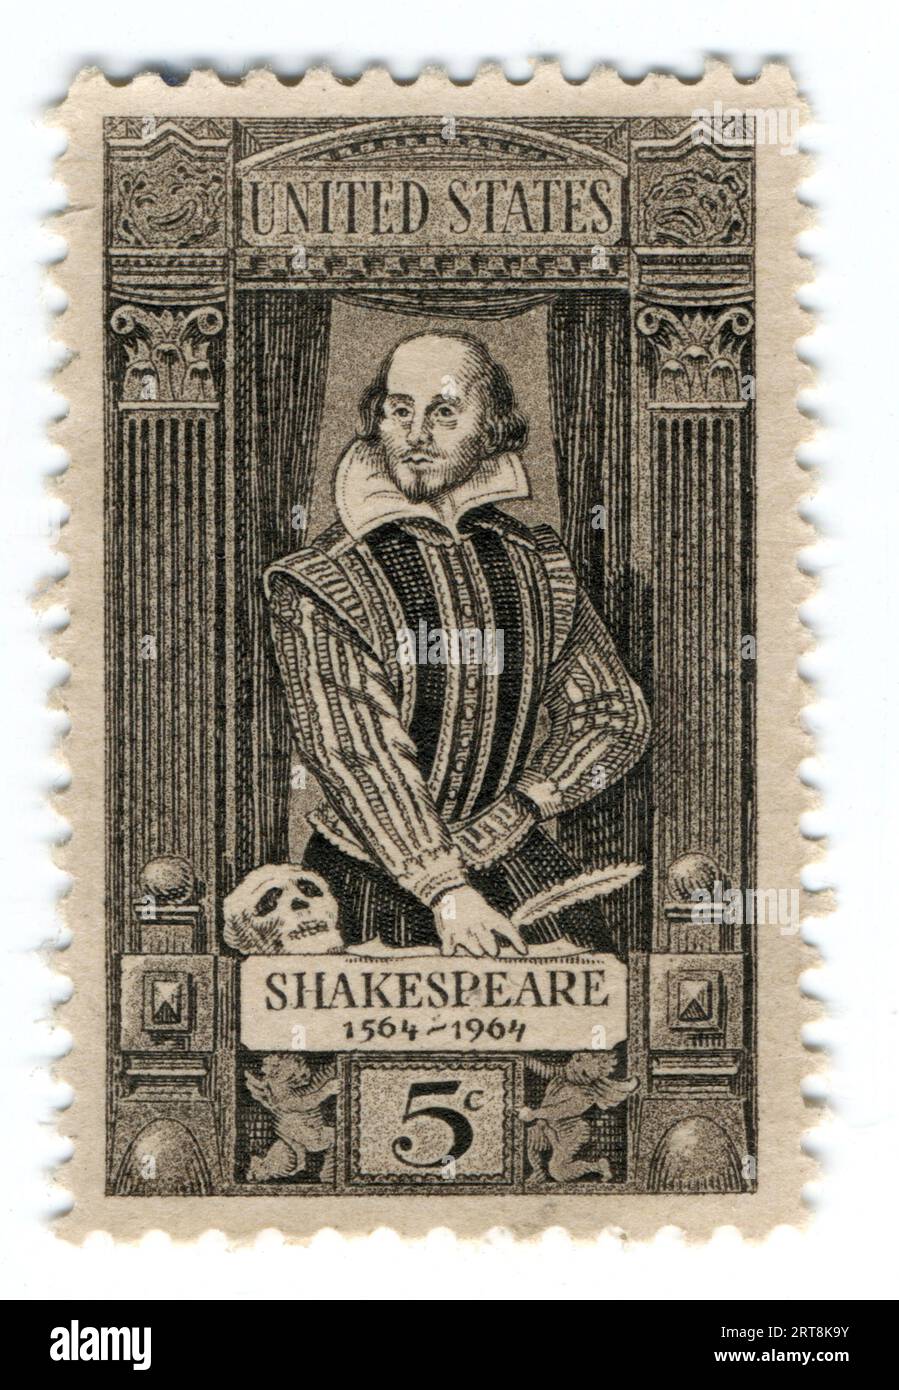 A five-cent U.S. postage stamp honoring William Shakespeare issued by the United States Postal Service in 1964. Stock Photo